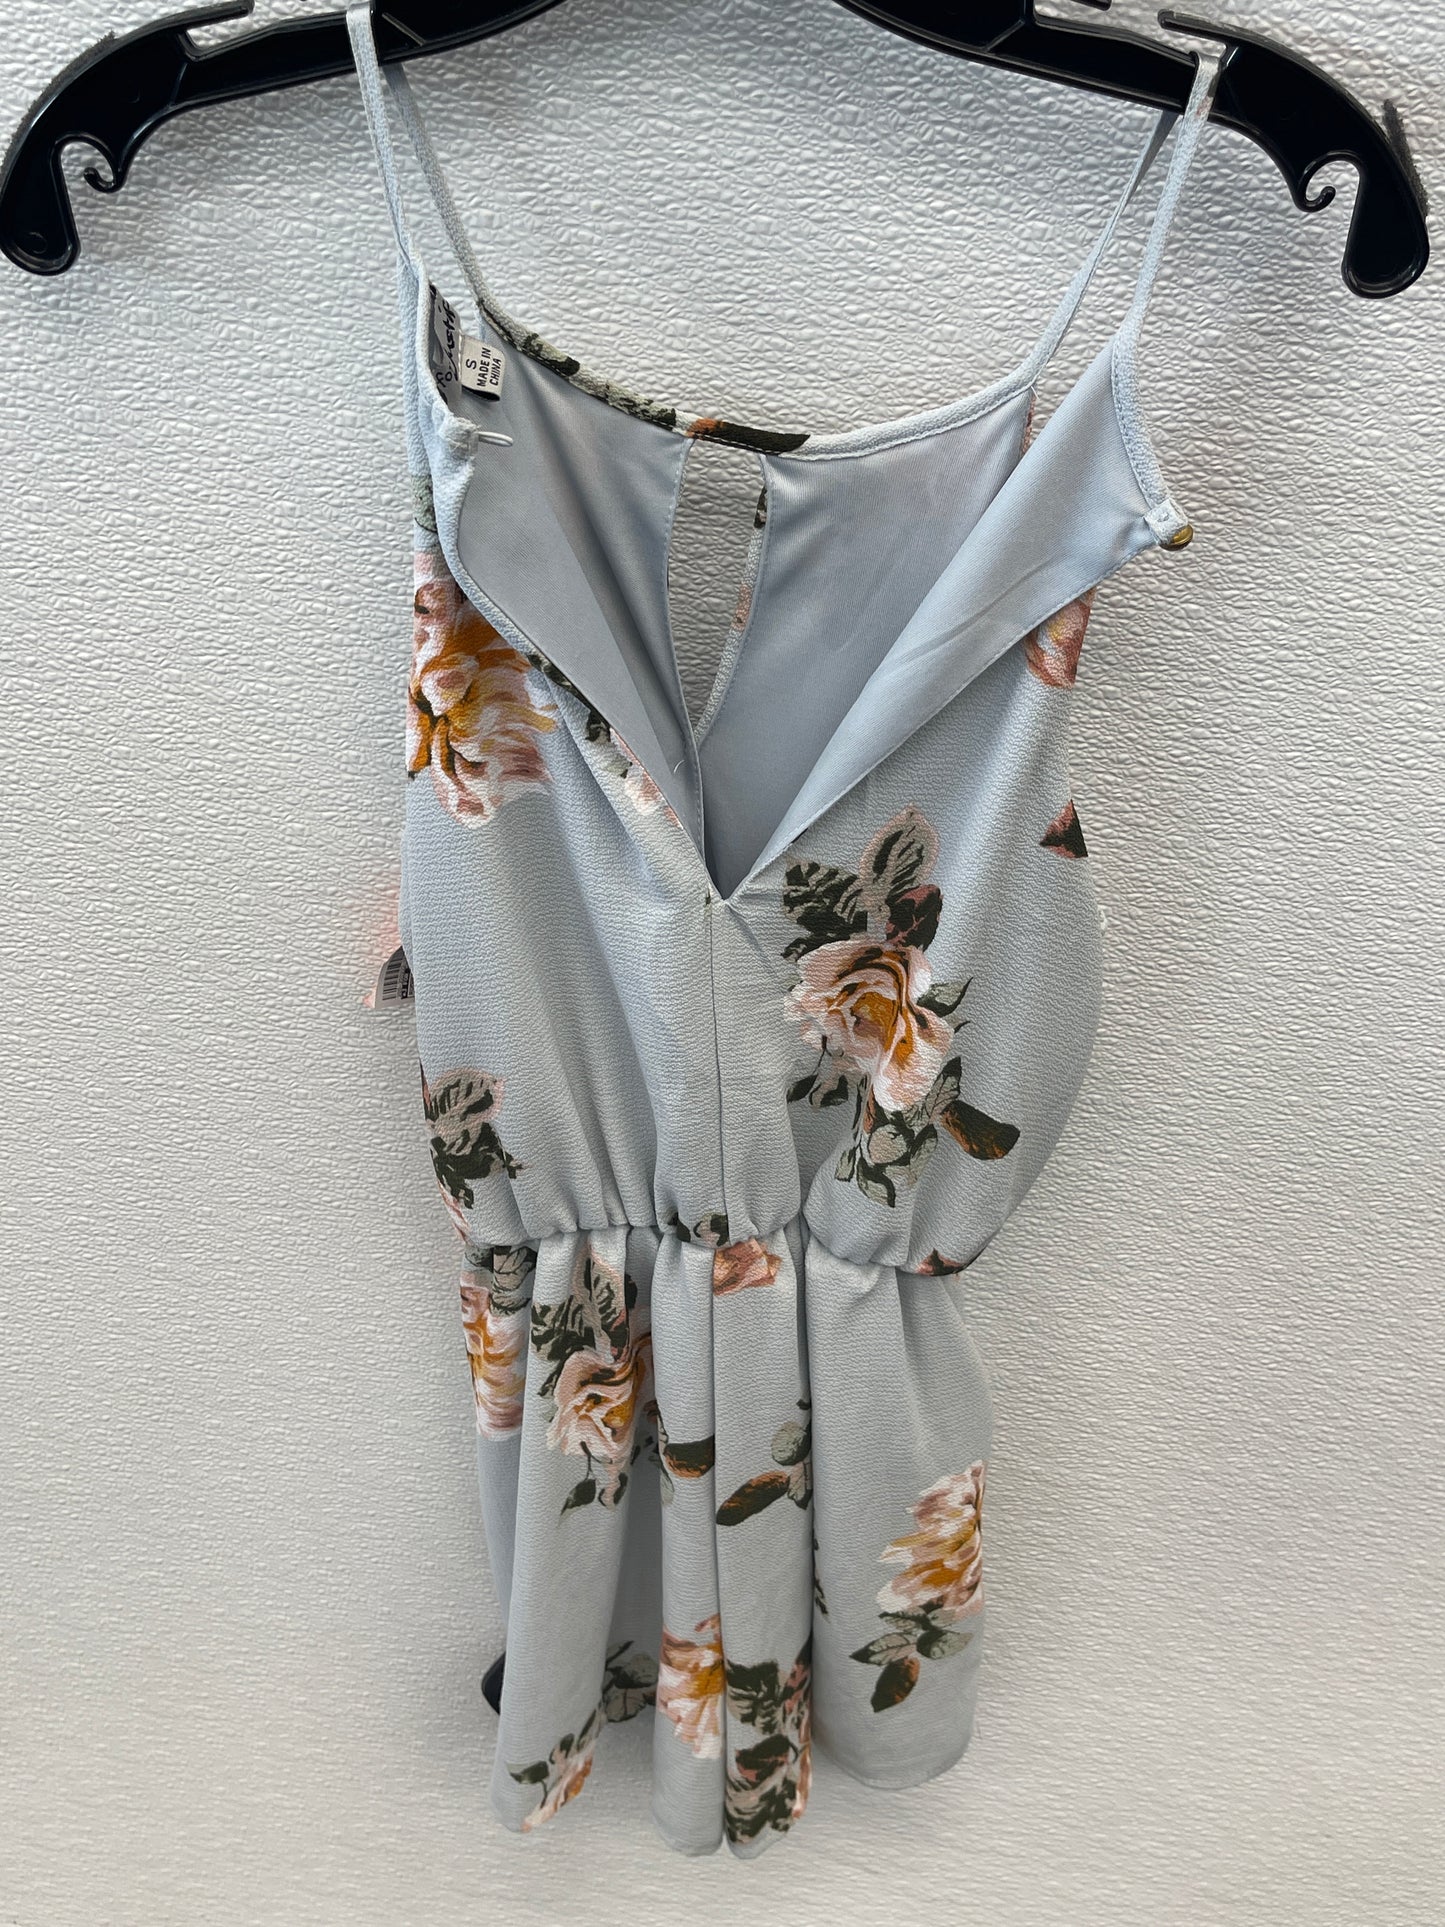 Romper By J For Justify  Size: S